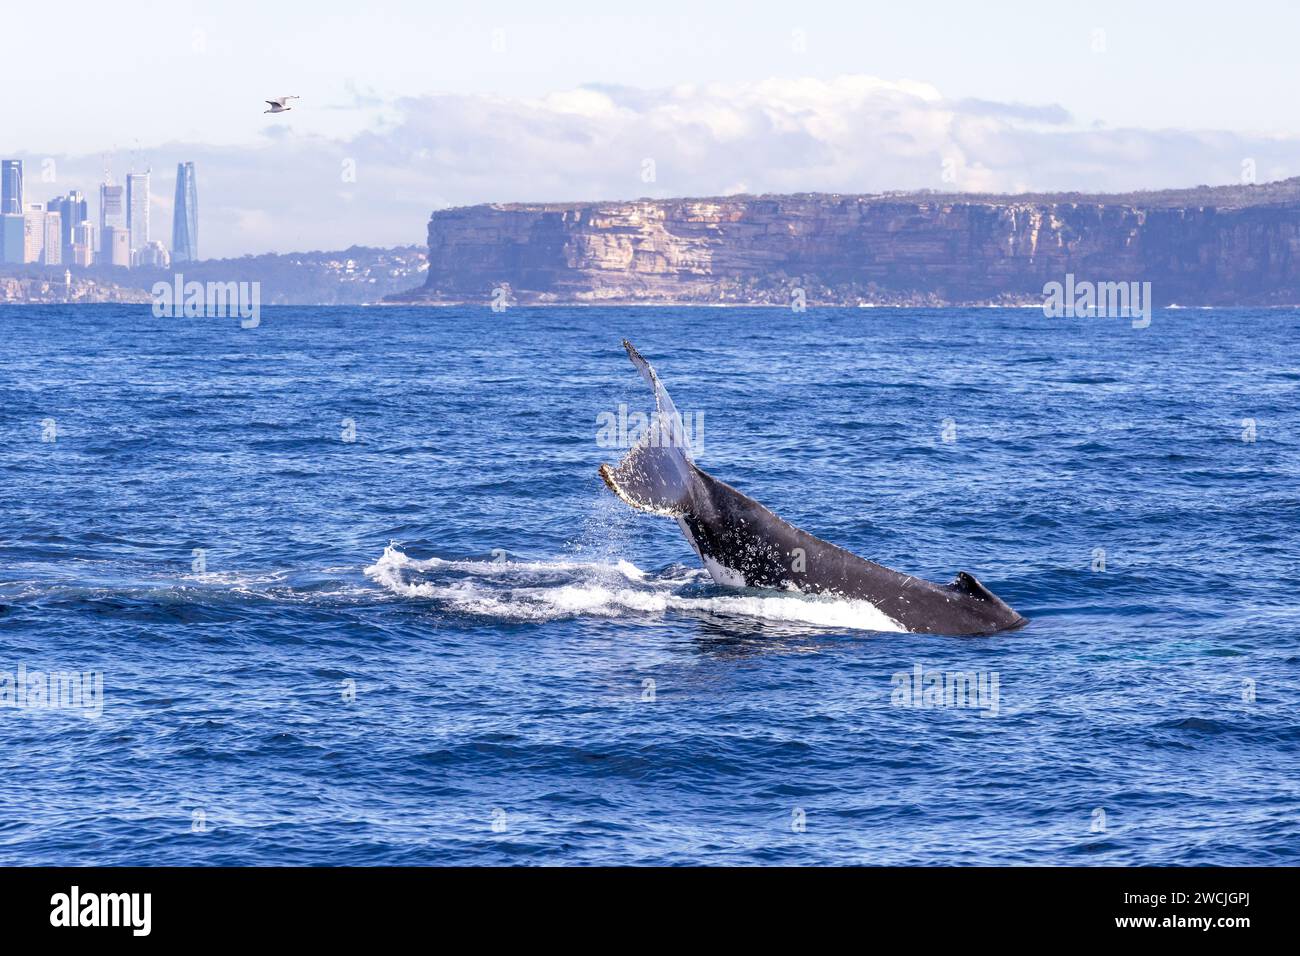 Whale watching New South Wales, Australia. Migration of Humpback Whales along the Eastern coast of Australia. Whale-watching cruise. Stock Photo